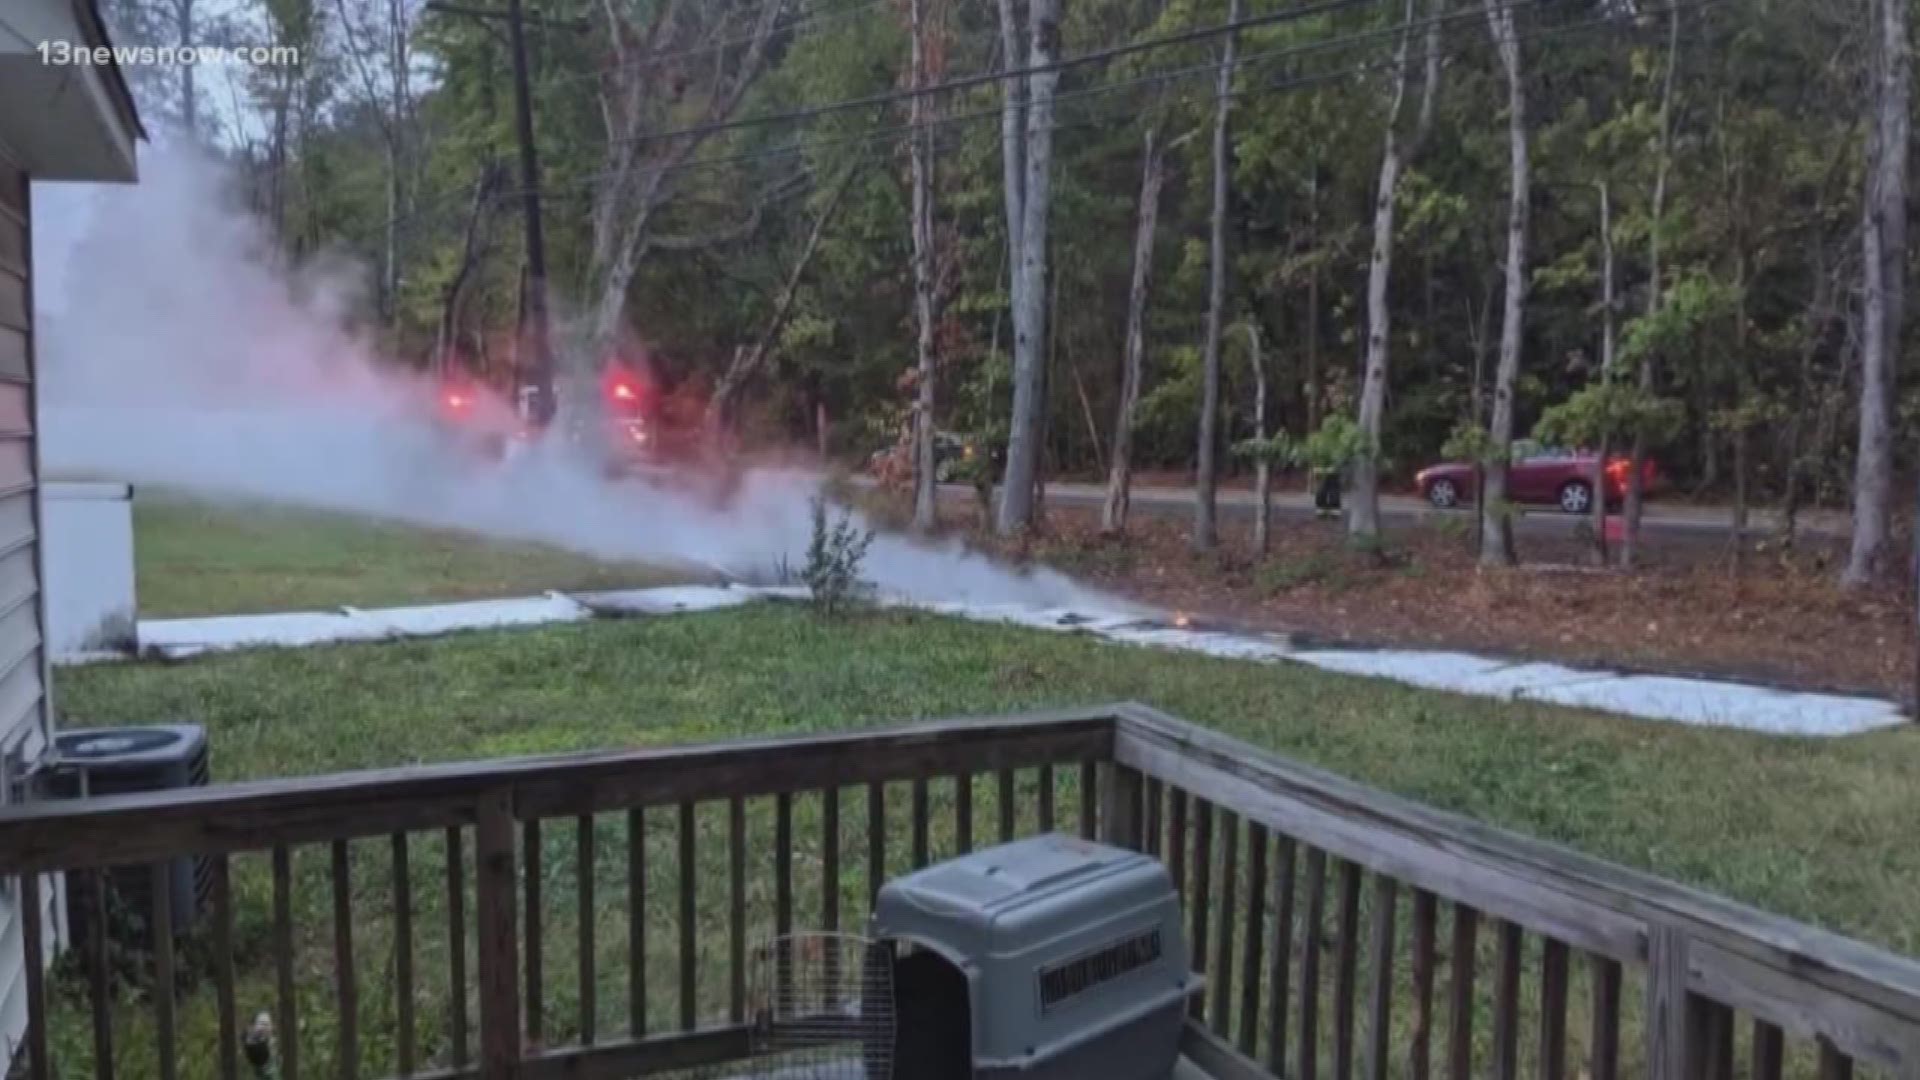 During the rain in Newport News, a power line snapped and started a fire on a family's fence. The homeowner said it could have been worse, but it was traumatic.